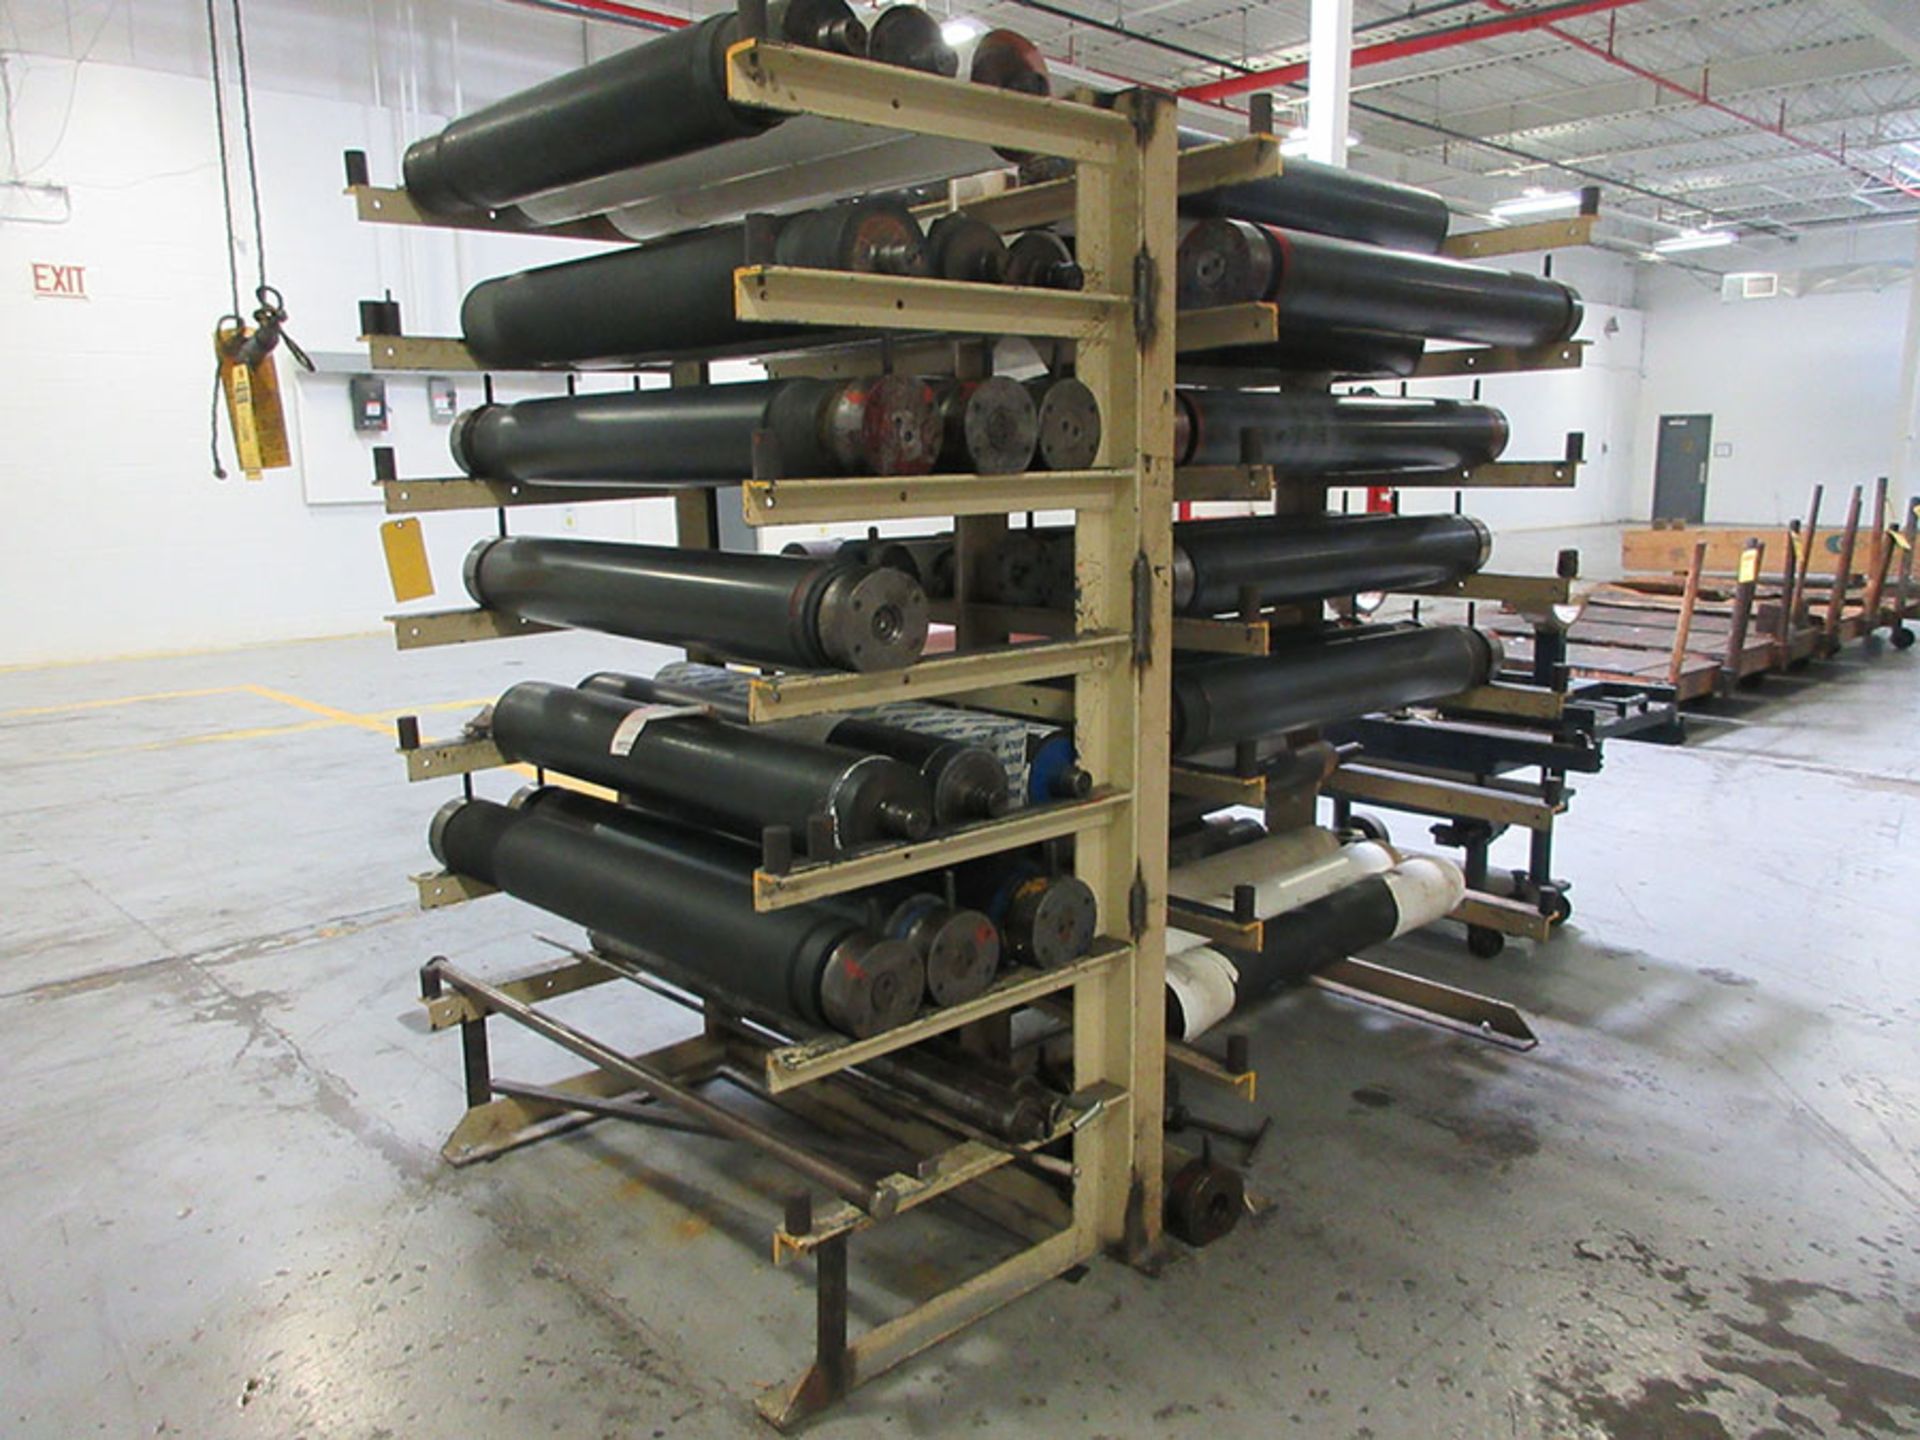 400 +/- ASSORTED PRINT ROLLERS, BASINS, BASIN CARTS, ALL OTHER ACCESSORIES PERTAINING TO PRINT - Image 13 of 14